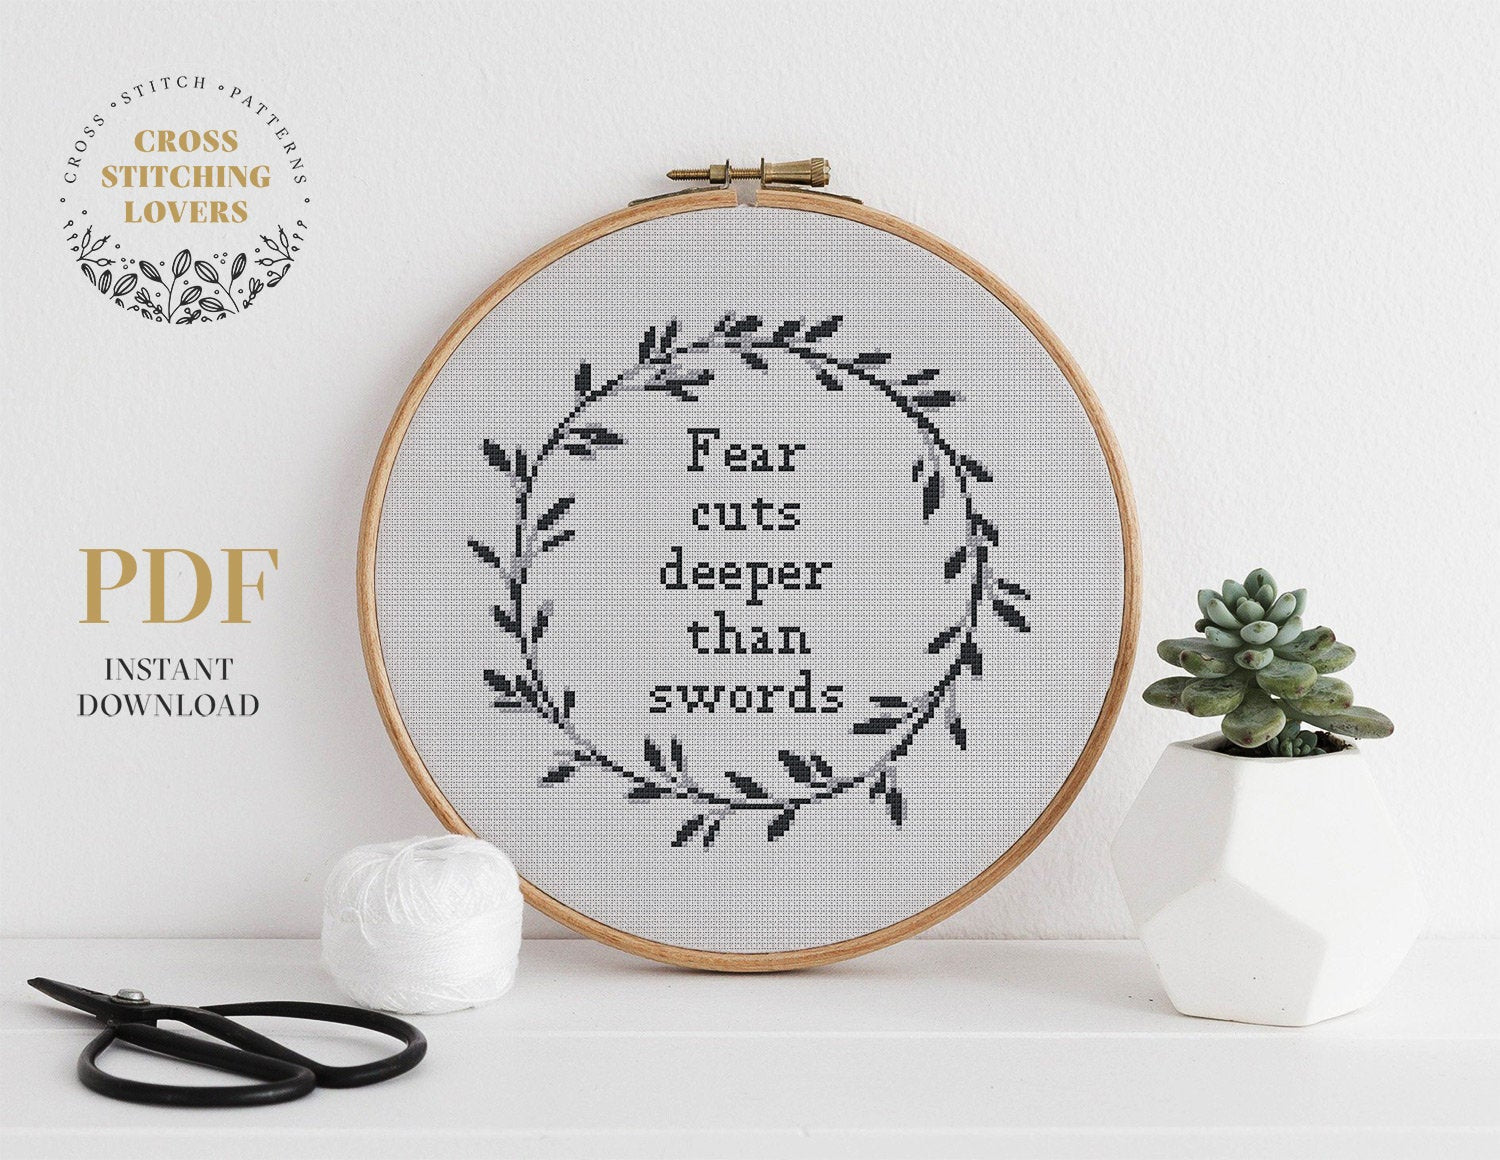 Game of Thrones quote - Cross stitch pattern